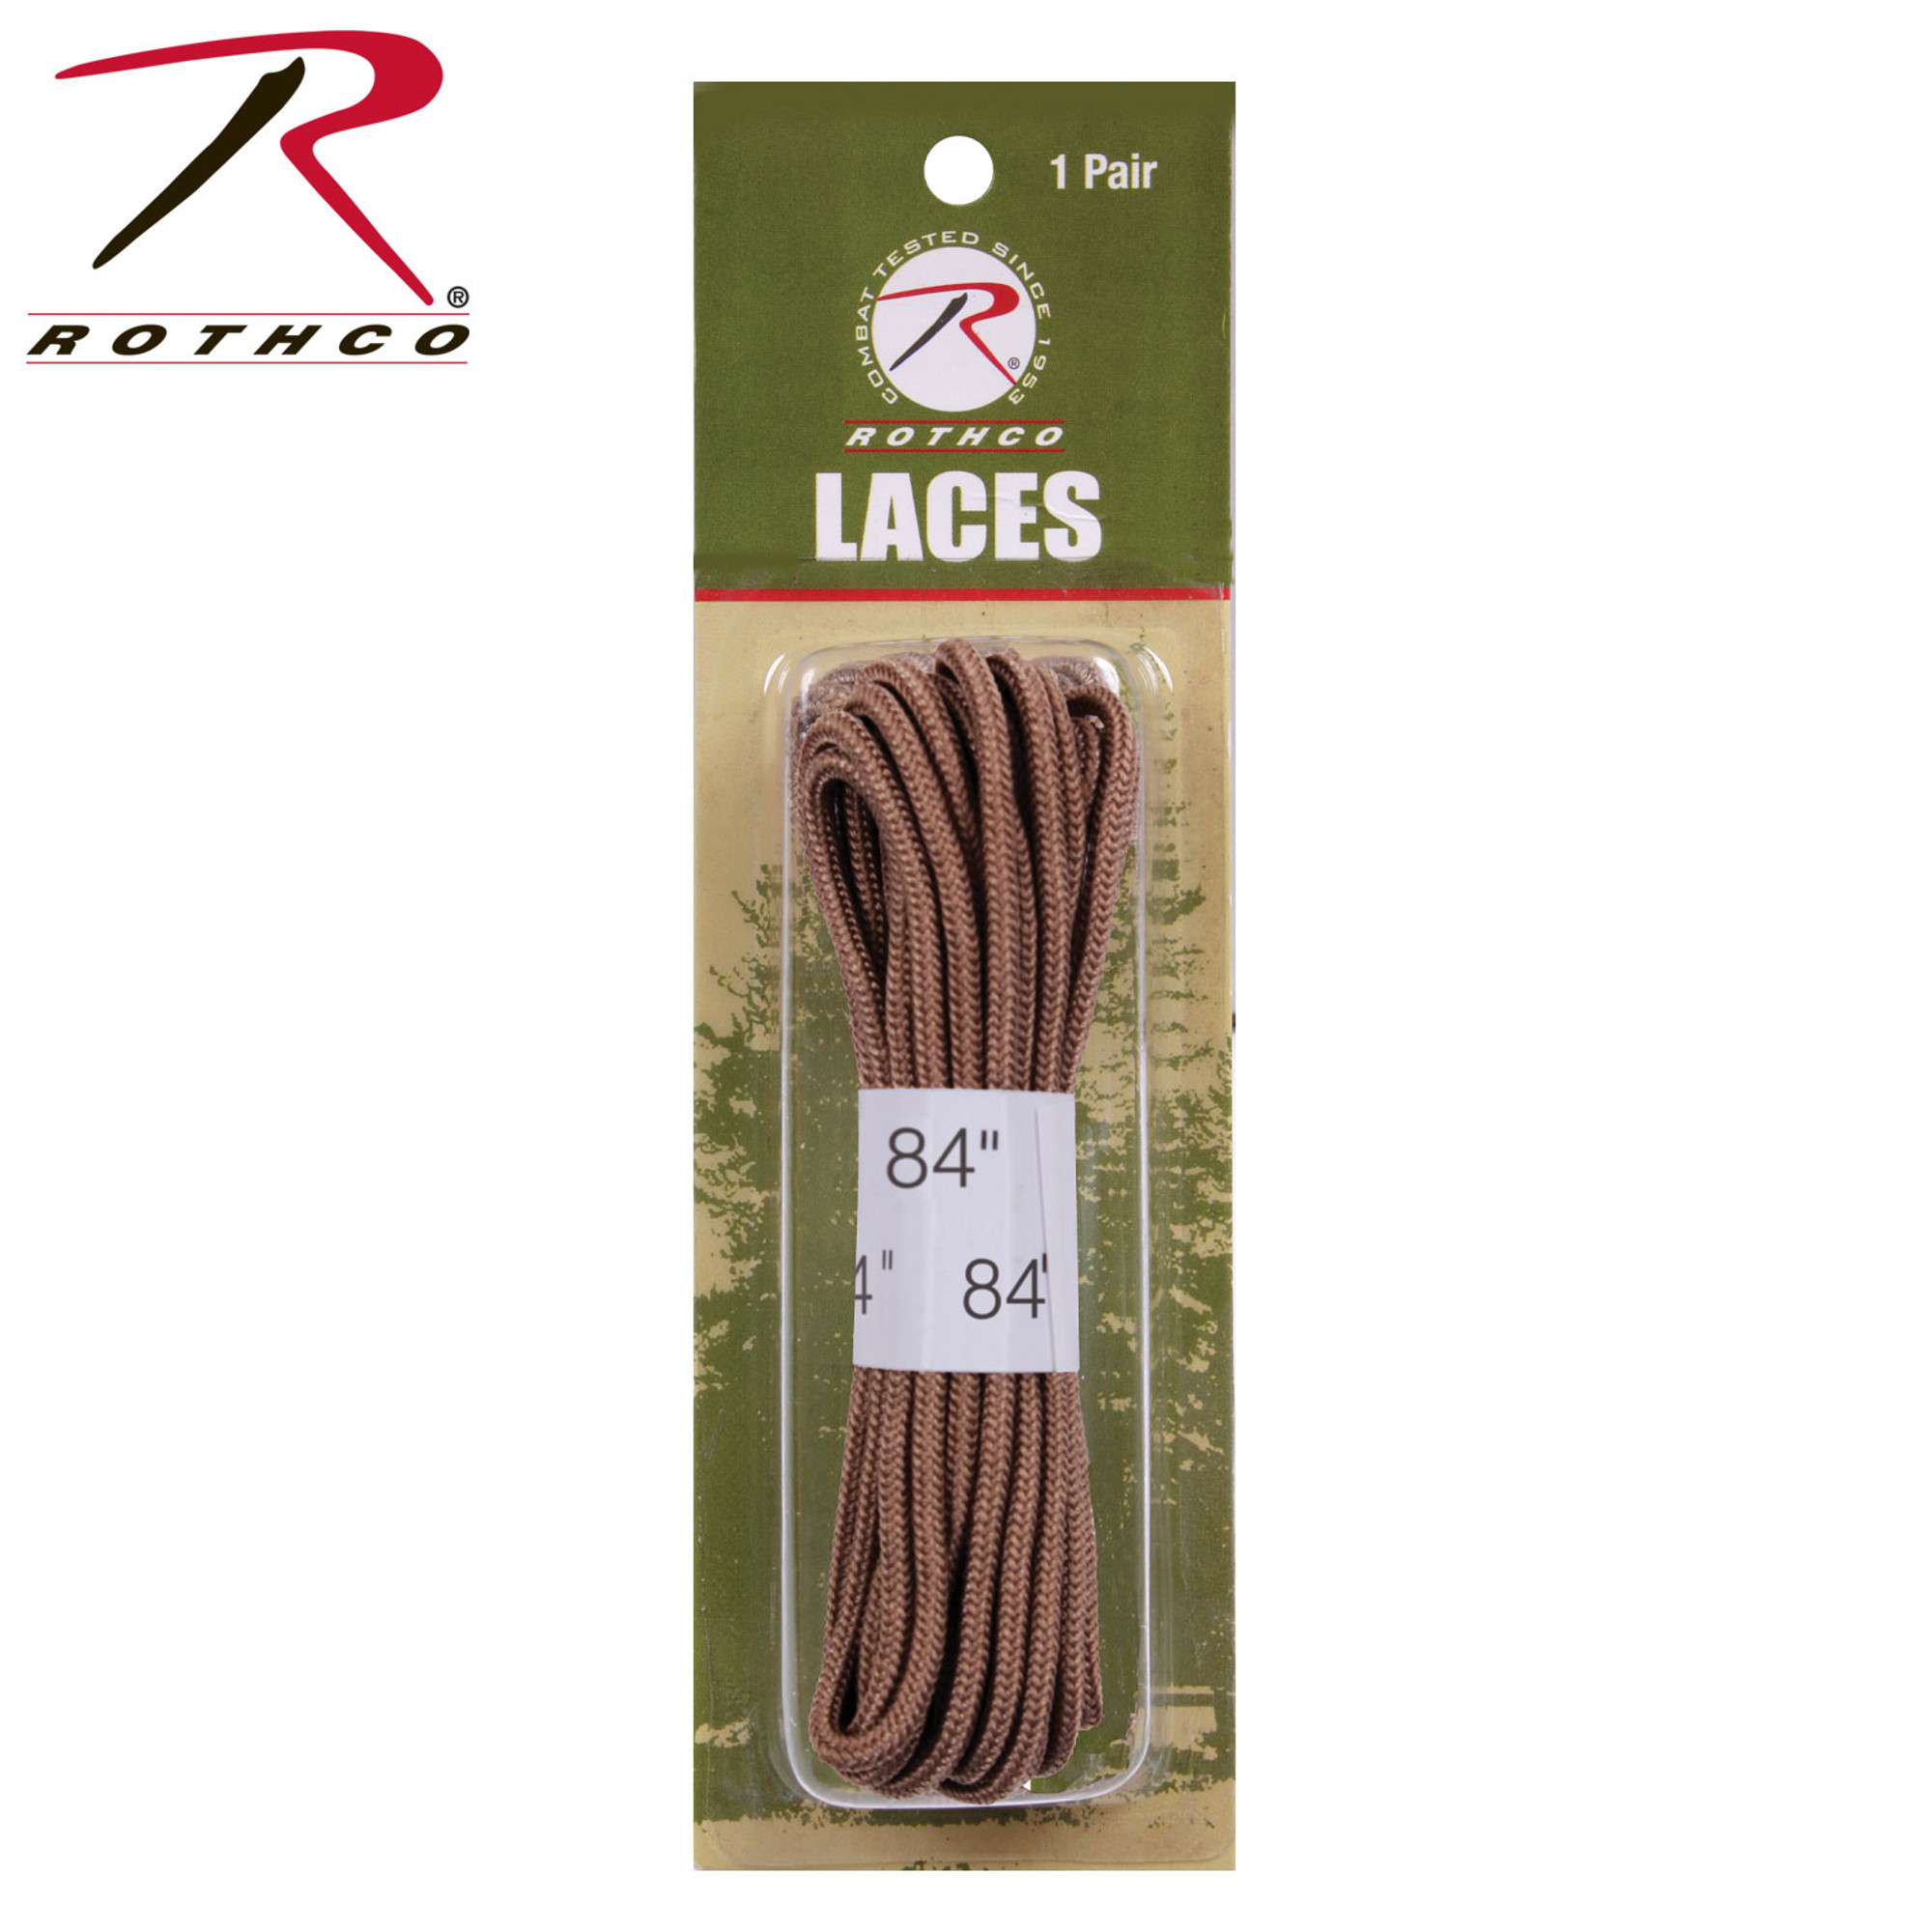 Rothco Boot Laces - Coyote Brown - 84"